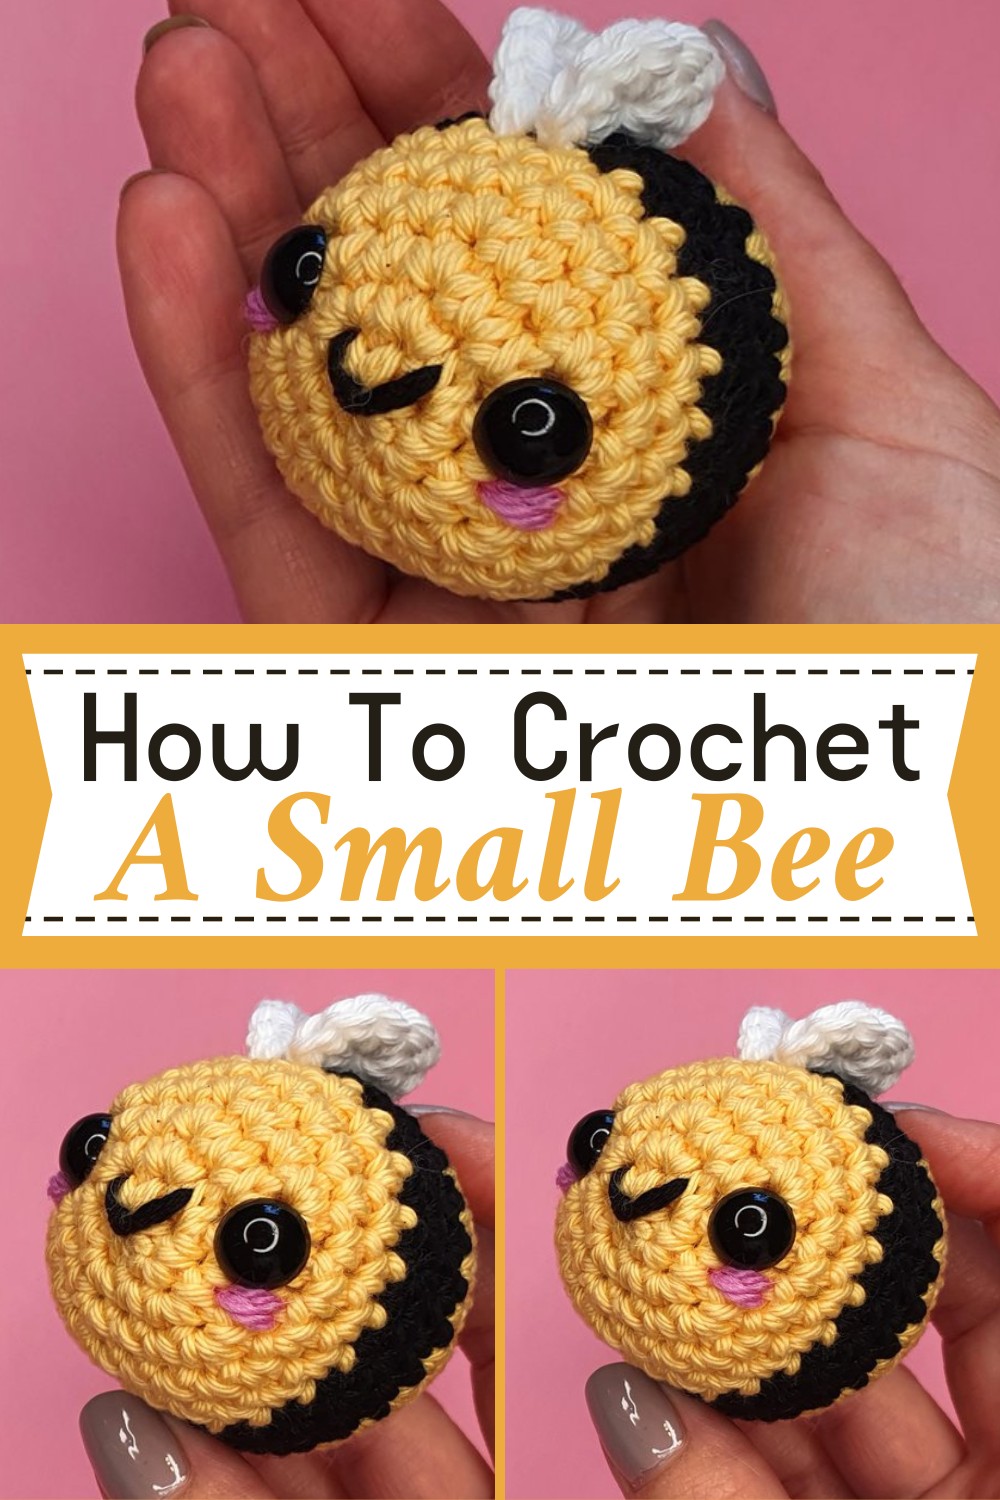 How To Crochet A Small Bee